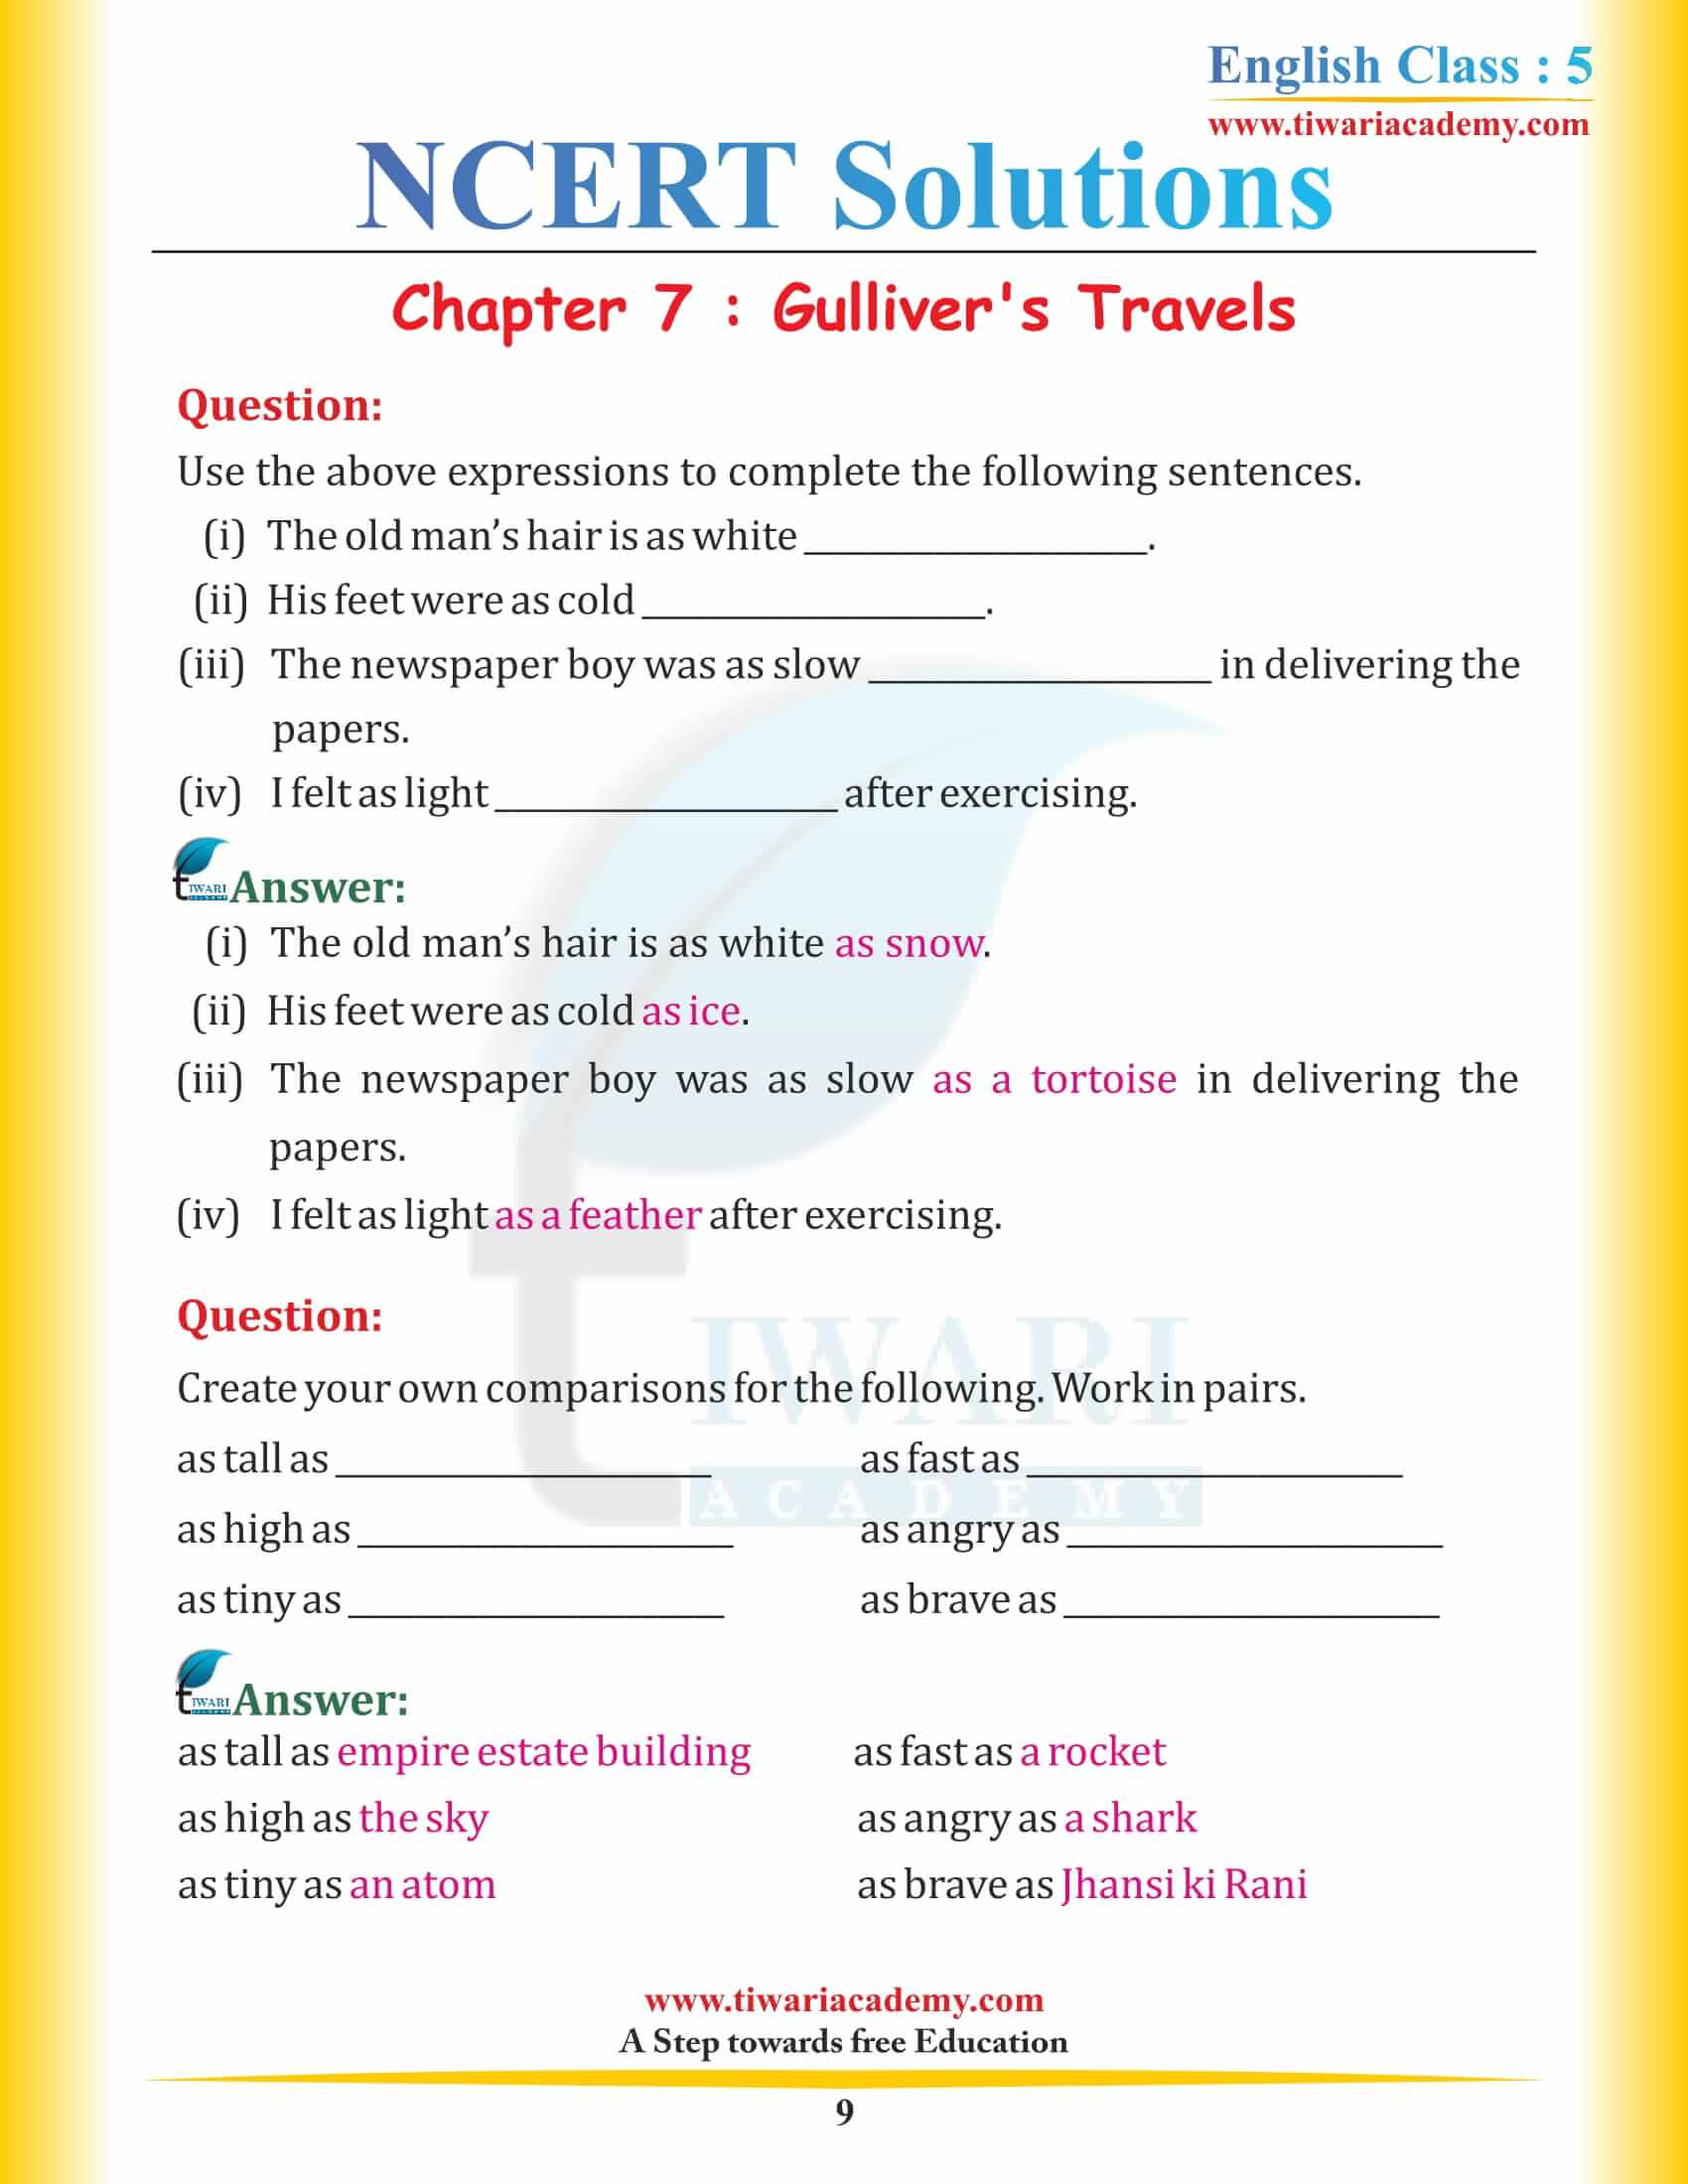 NCERT Solutions for Class 5 English Chapter 7 Gulliver’s Travels Hindi Medium